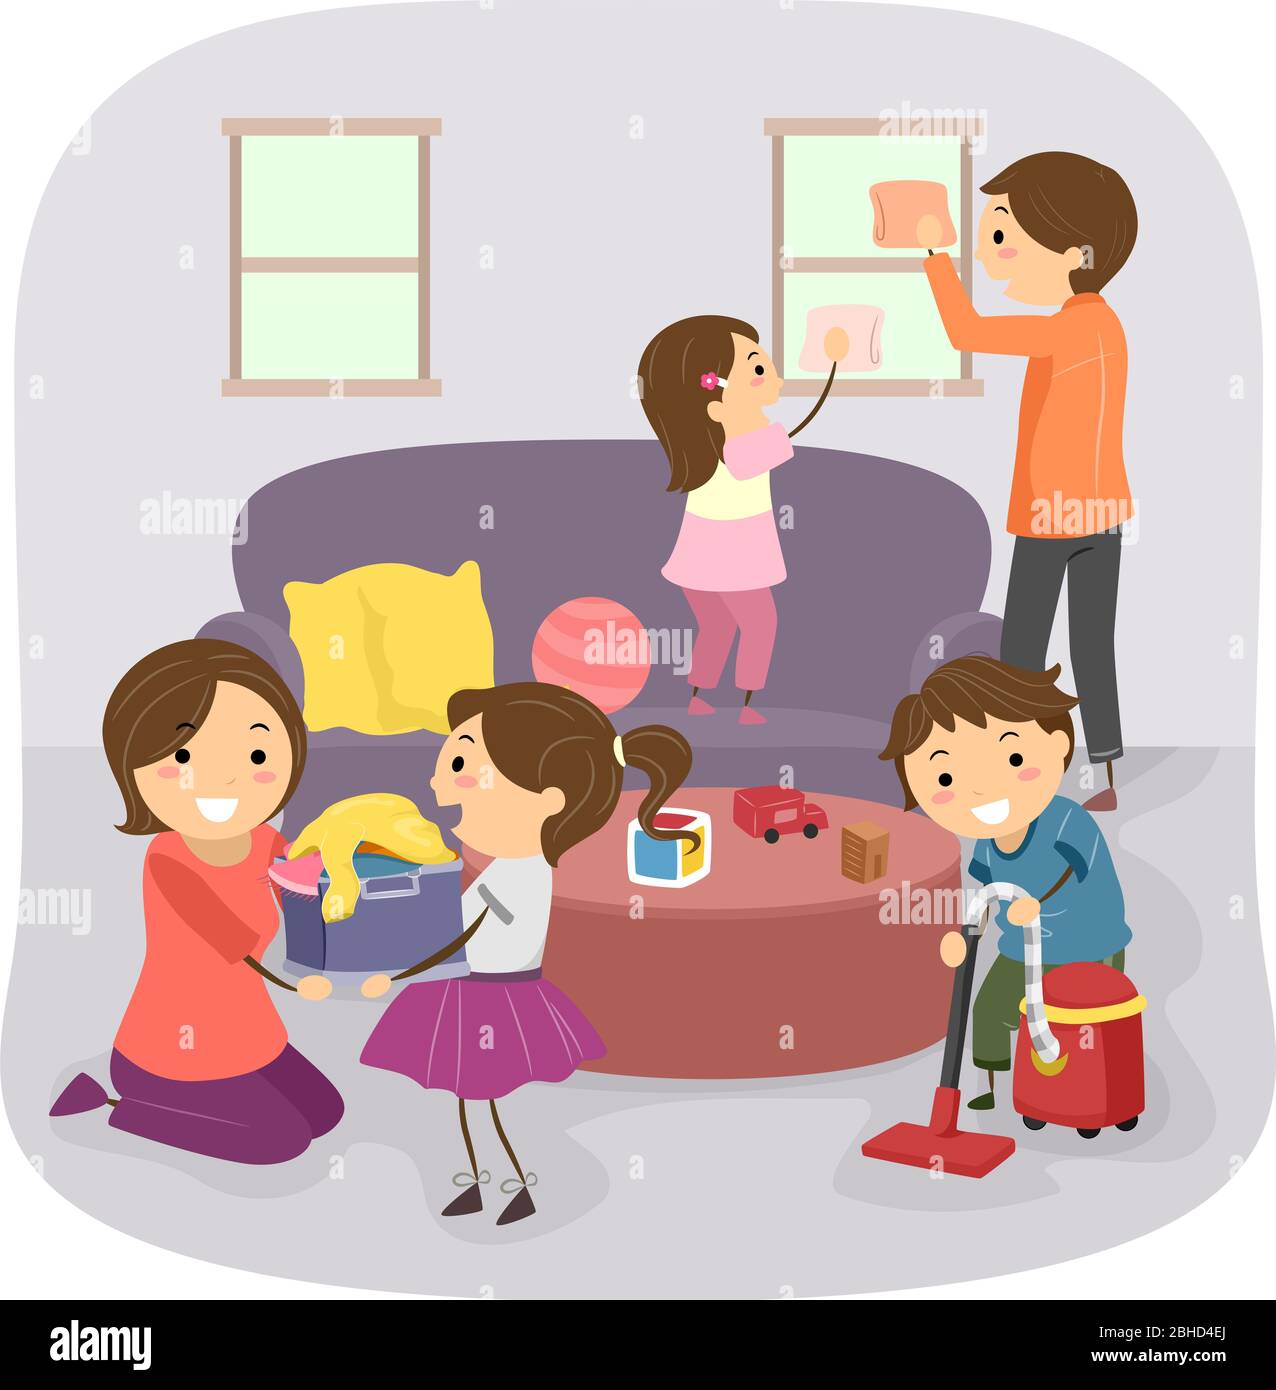 Illustration Of Stickman Kids Helping Parents With Cleaning The House Stock Photo Alamy